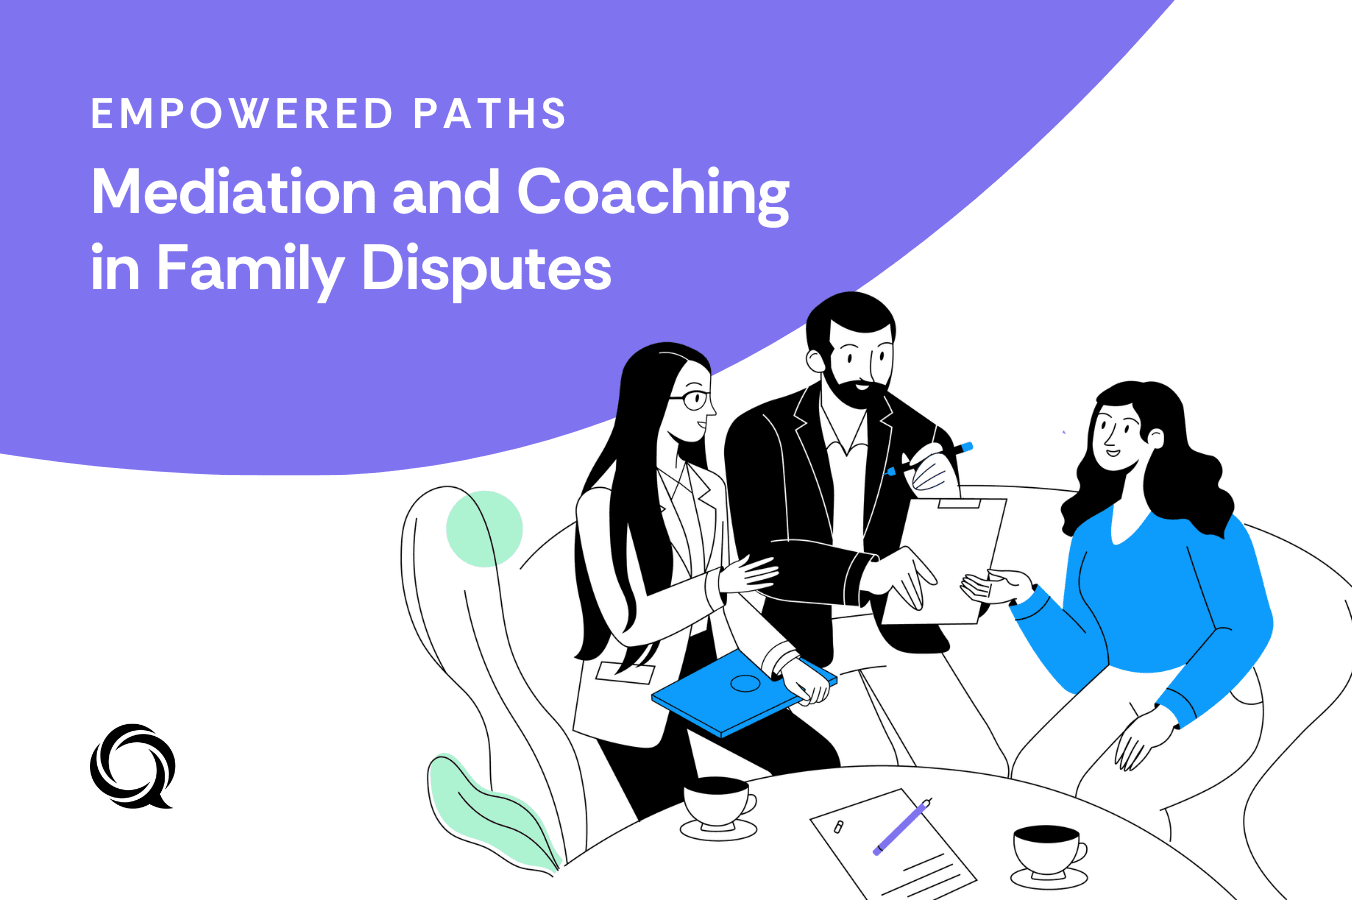 Empowered Paths: Mediation and Coaching in Family Disputes